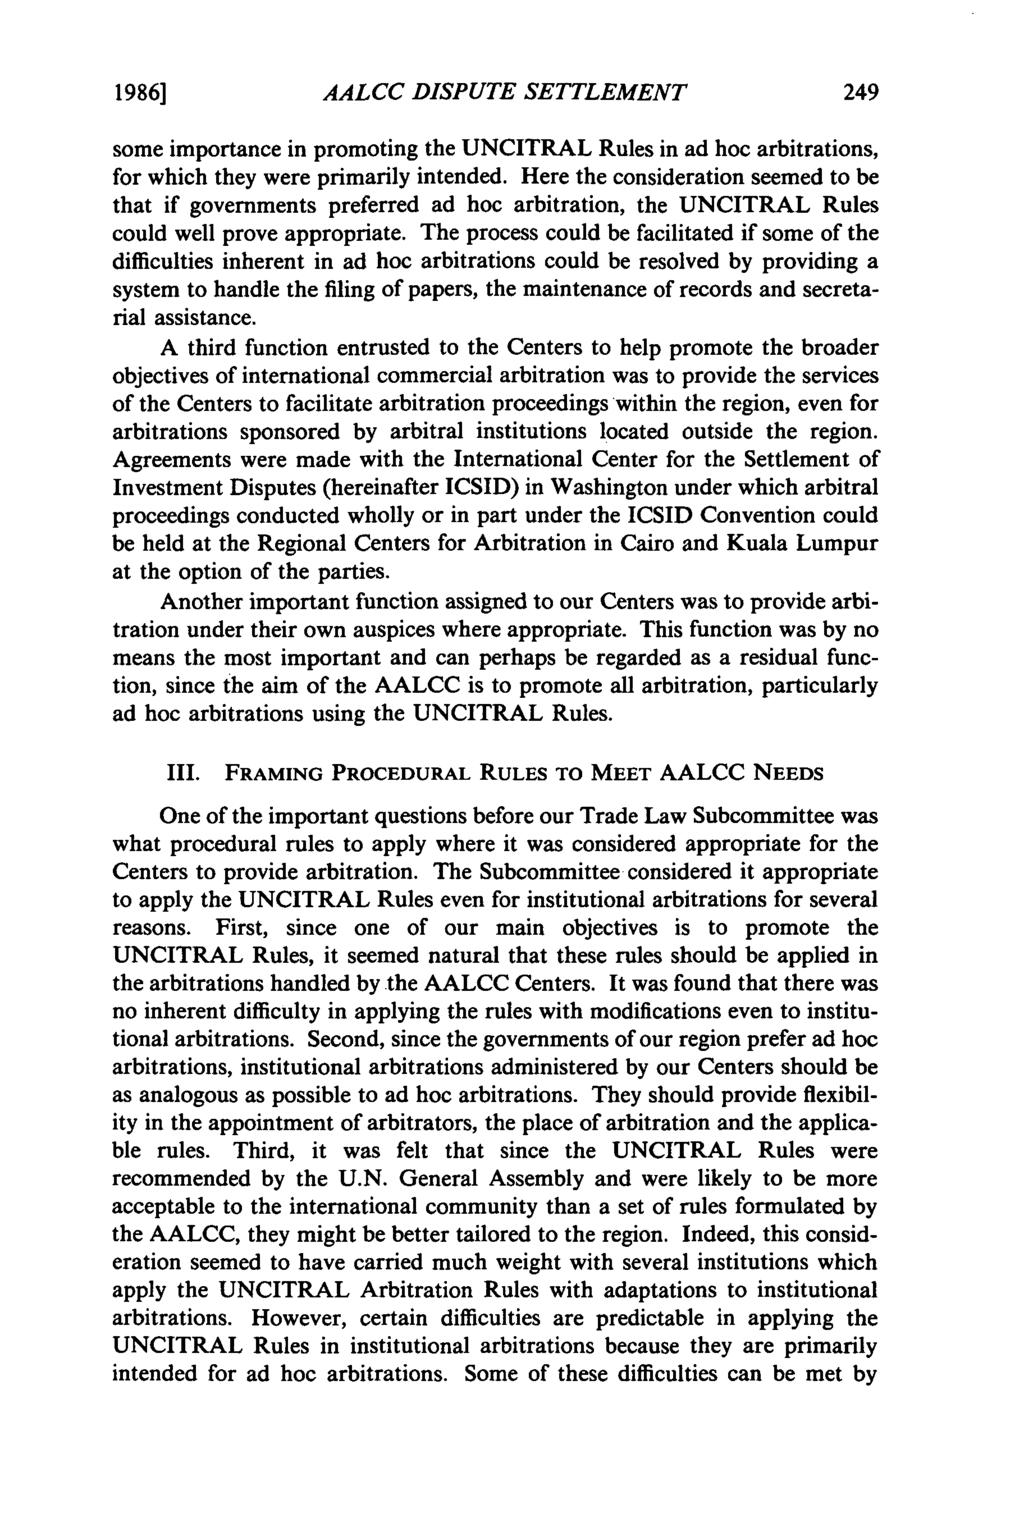 1986] AALCC DISPUTE SETTLEMENT some importance in promoting the UNCITRAL Rules in ad hoc arbitrations, for which they were primarily intended.